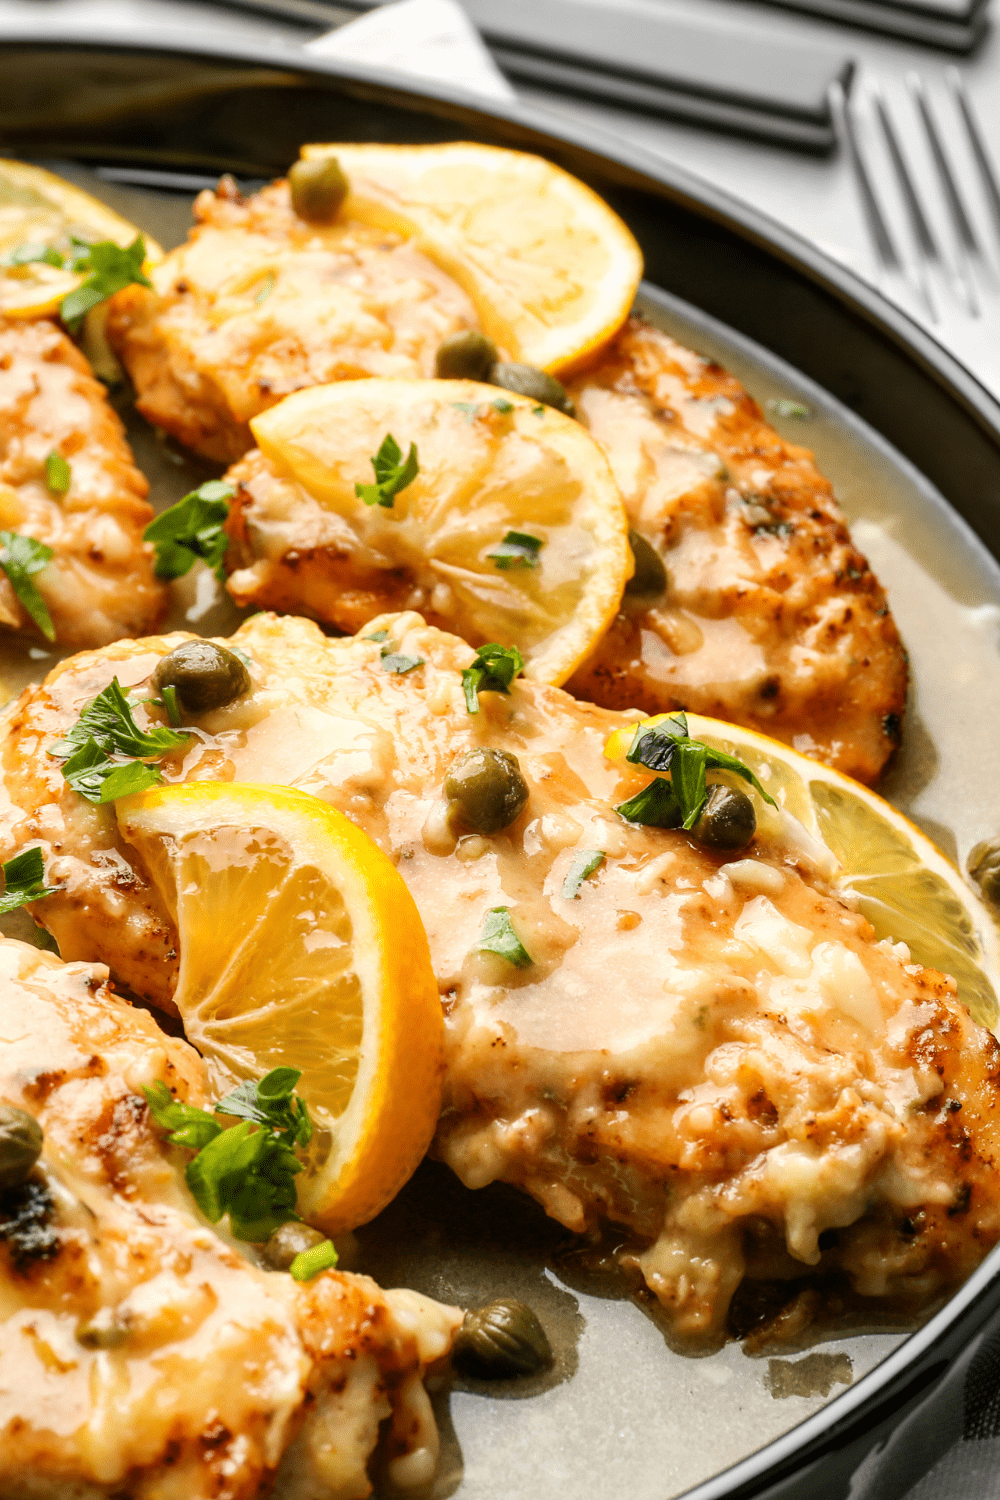 Chicken piccata in a pan with sauce and lemon slices.